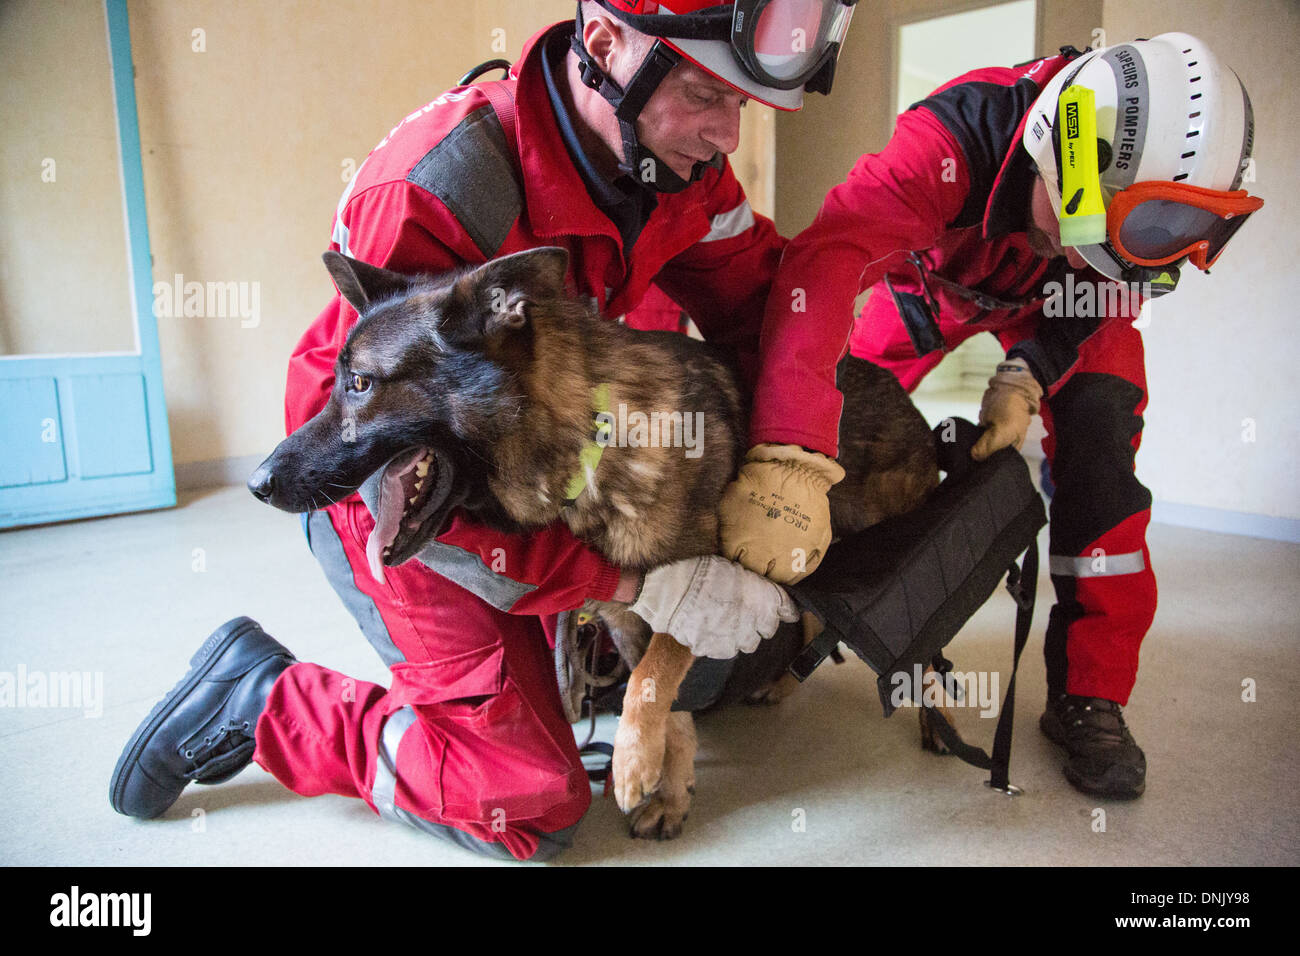 PREPARING THE DOG TO BE LOWERED BY ROPE OUT OF A WINDOW, FIREFIGHTERS' DOG TEAM, BELLEVUE, REDON, ILLE-ET-VILAINE (35), FRANCE Stock Photo